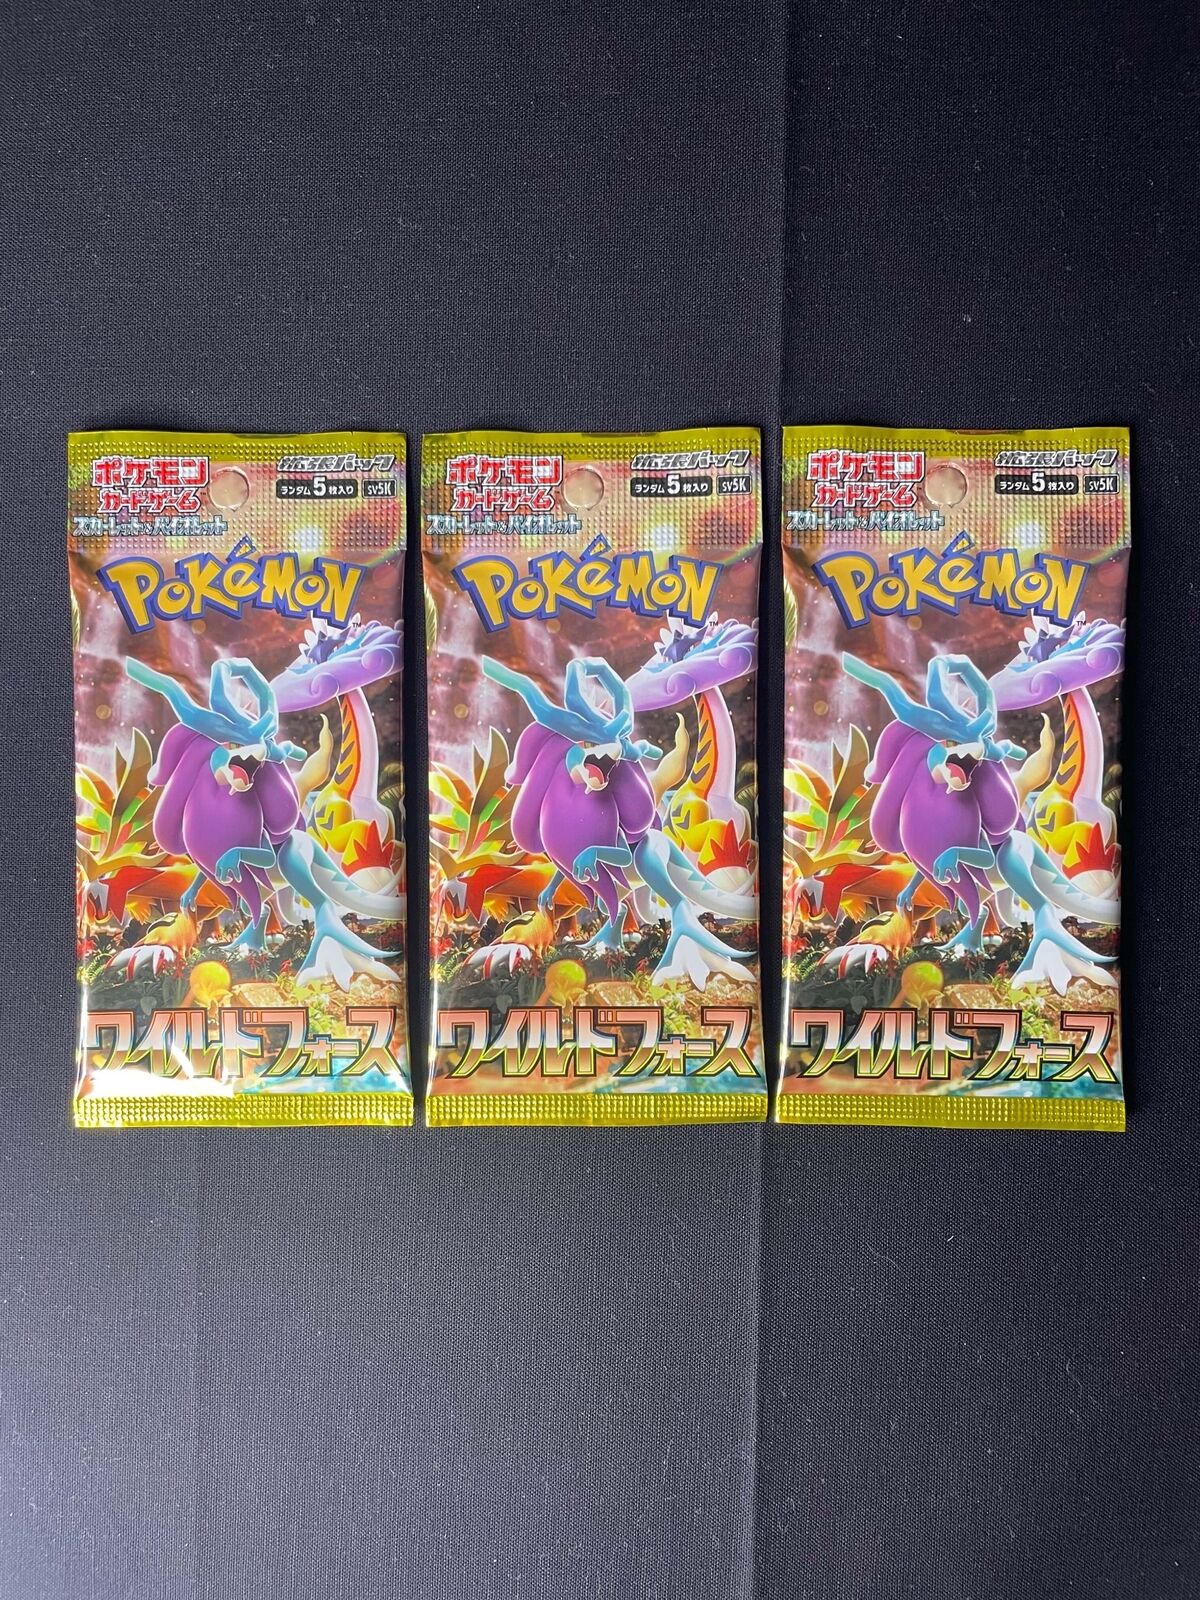 Pokemon 3 x Wild Force Japanese Booster Packs - UK Seller, Quick Delivery